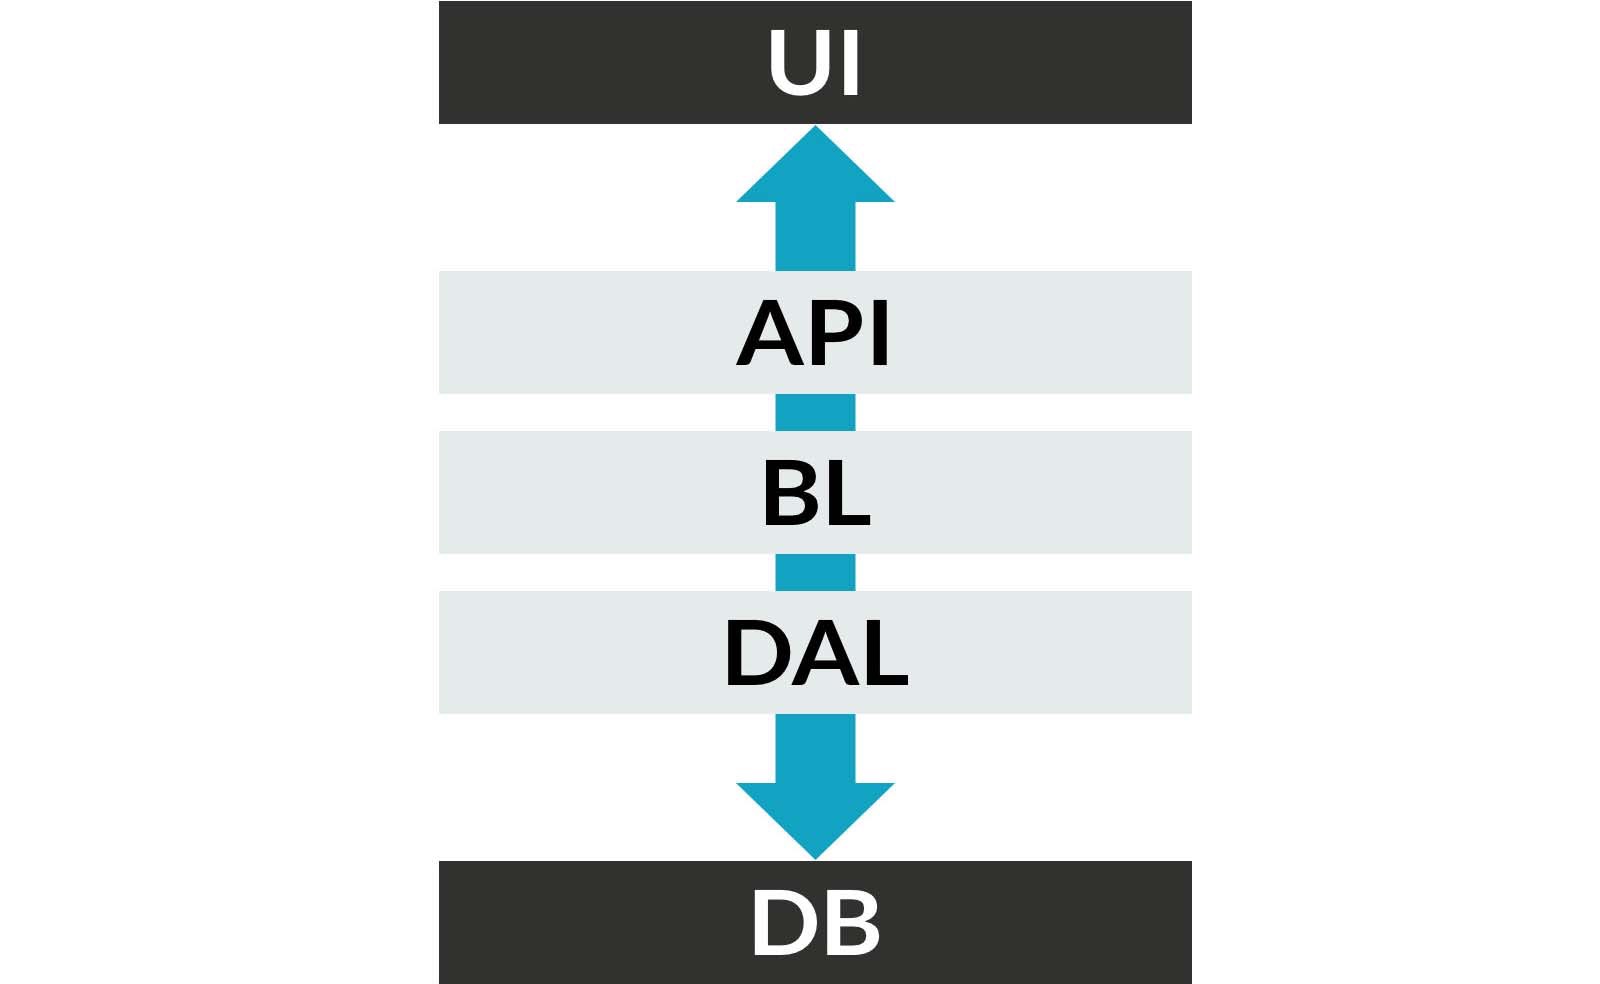 Coupling - from the UI to the DB